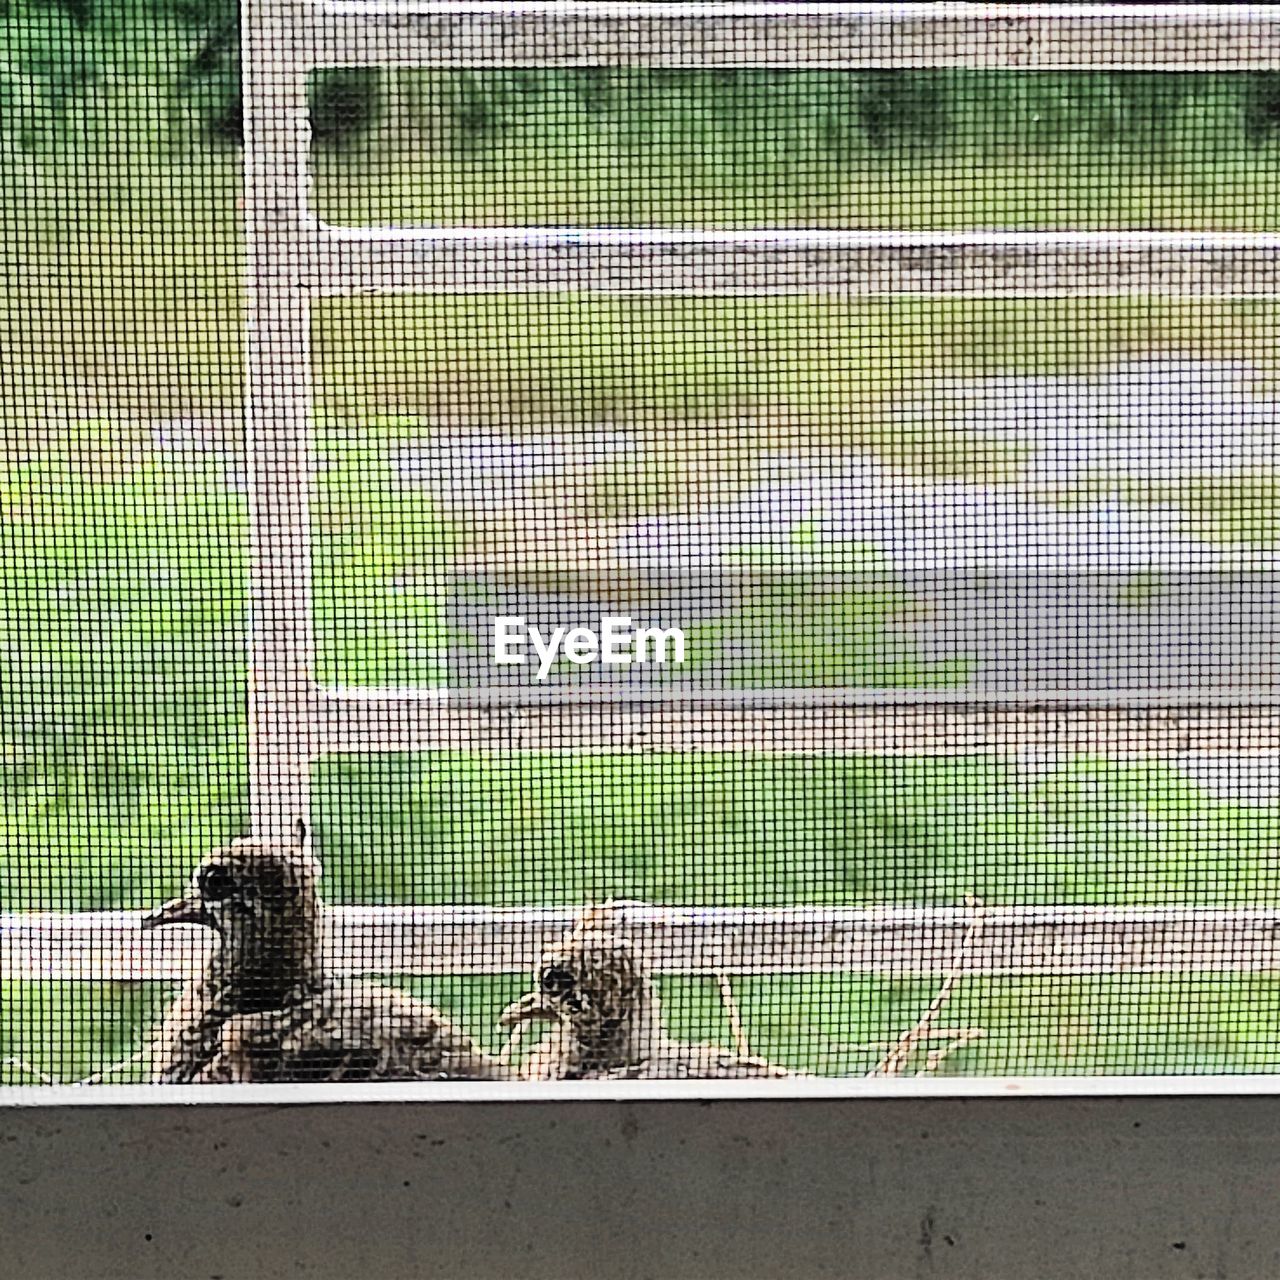 VIEW OF AN ANIMAL BEHIND FENCE